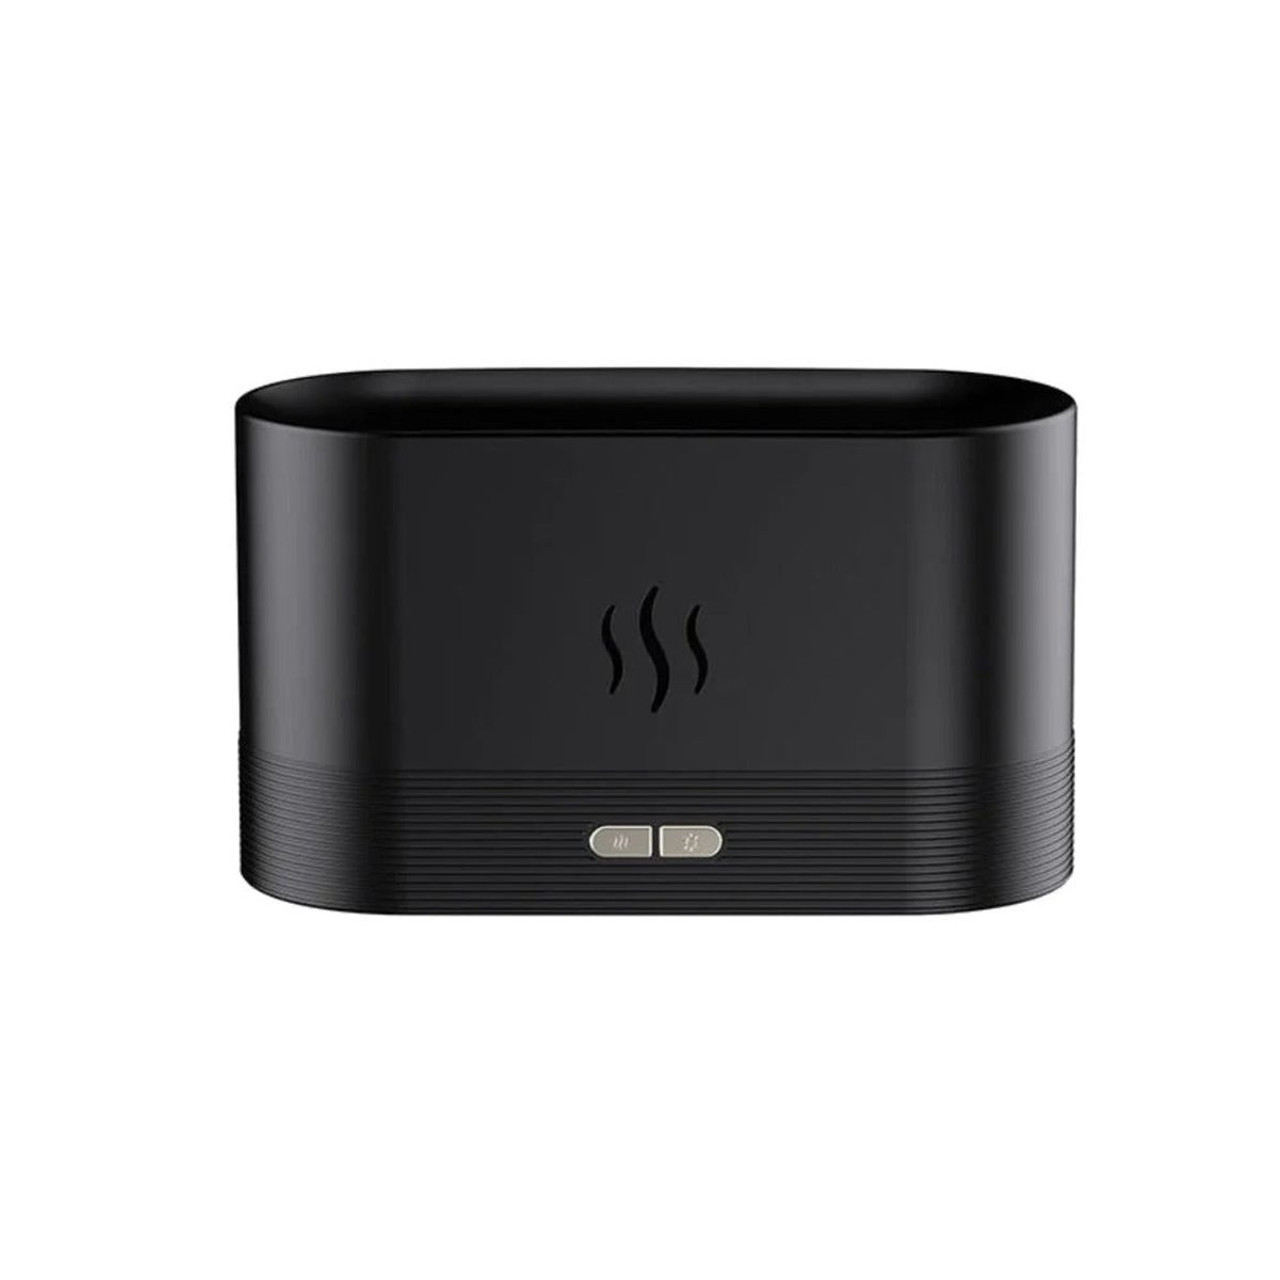 Aroma Air Diffuser with Simulated Flame Lighting Effect product image